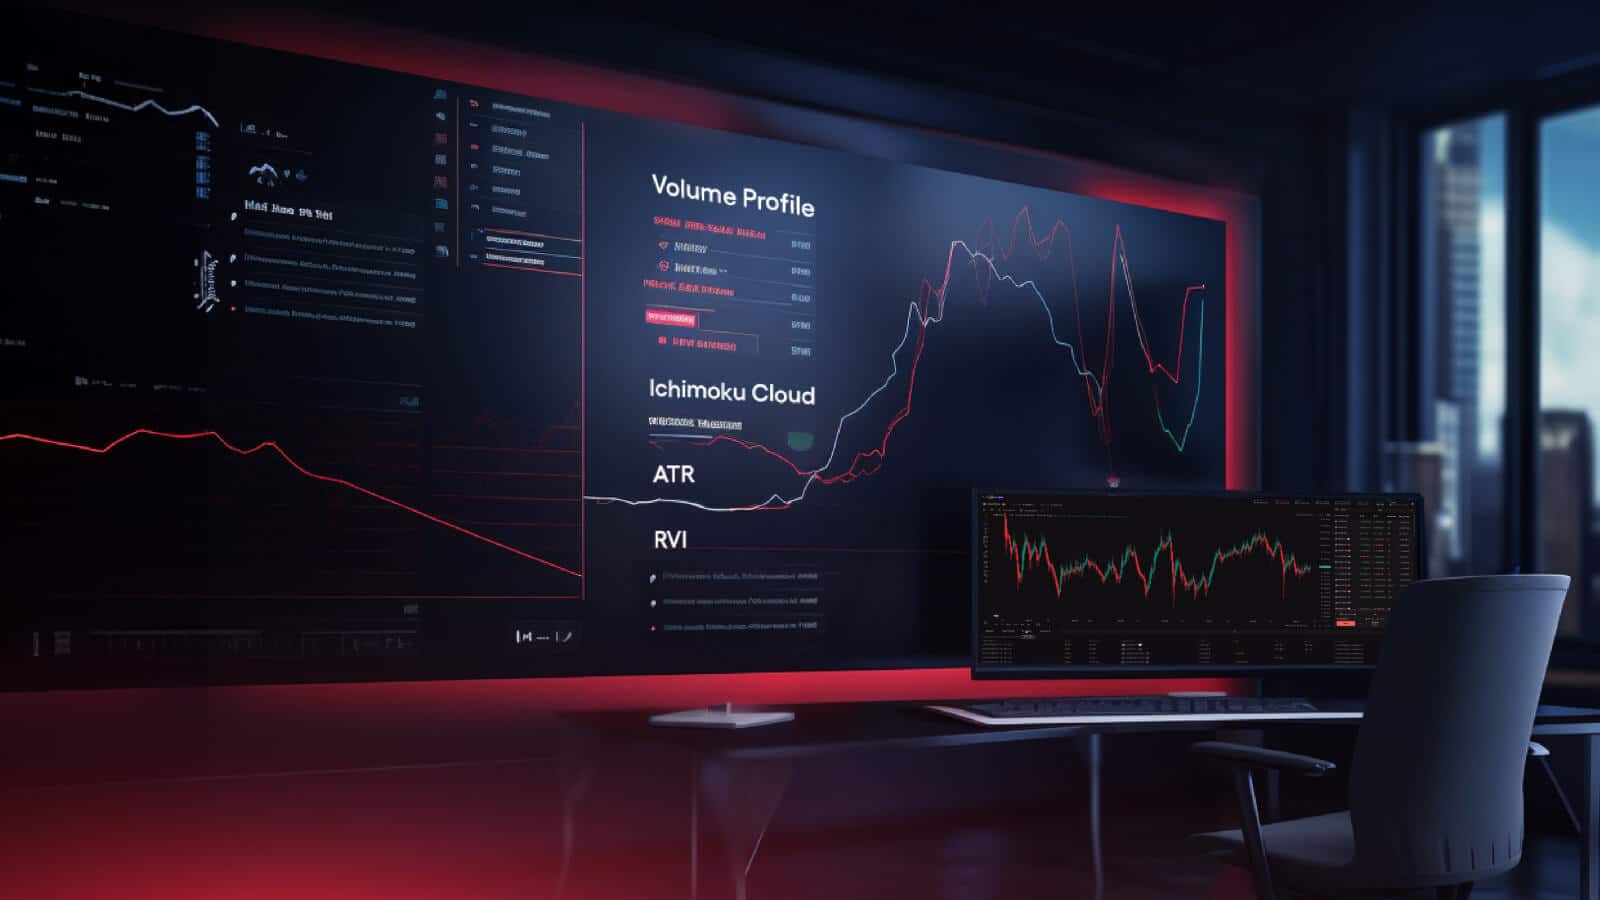 Futuristic trading station with 4 of the top TradingView indicators